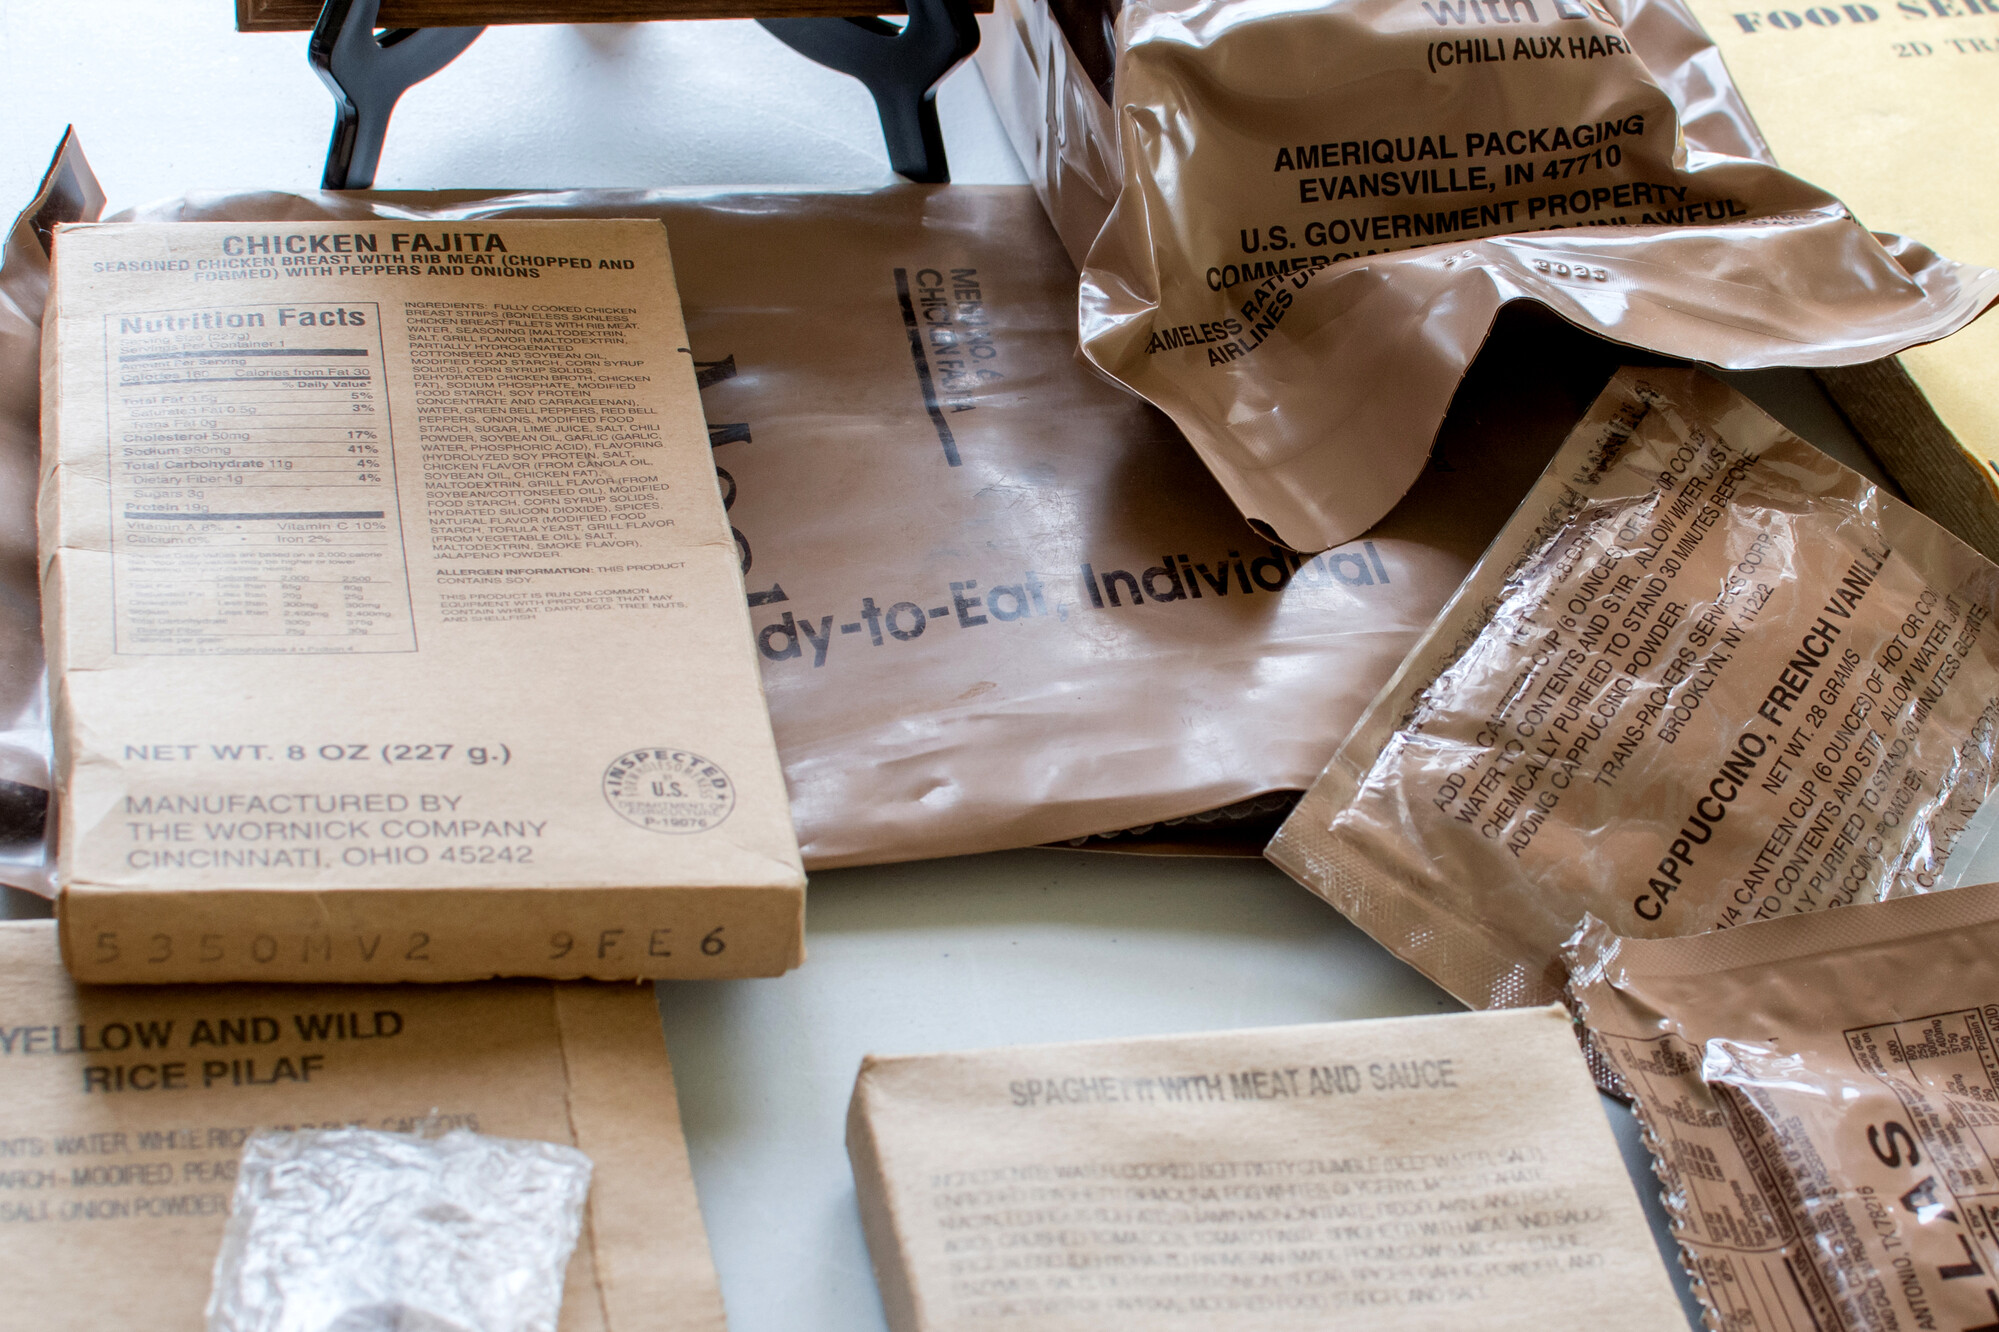 MRE's (meals ready to eat) multiple types.